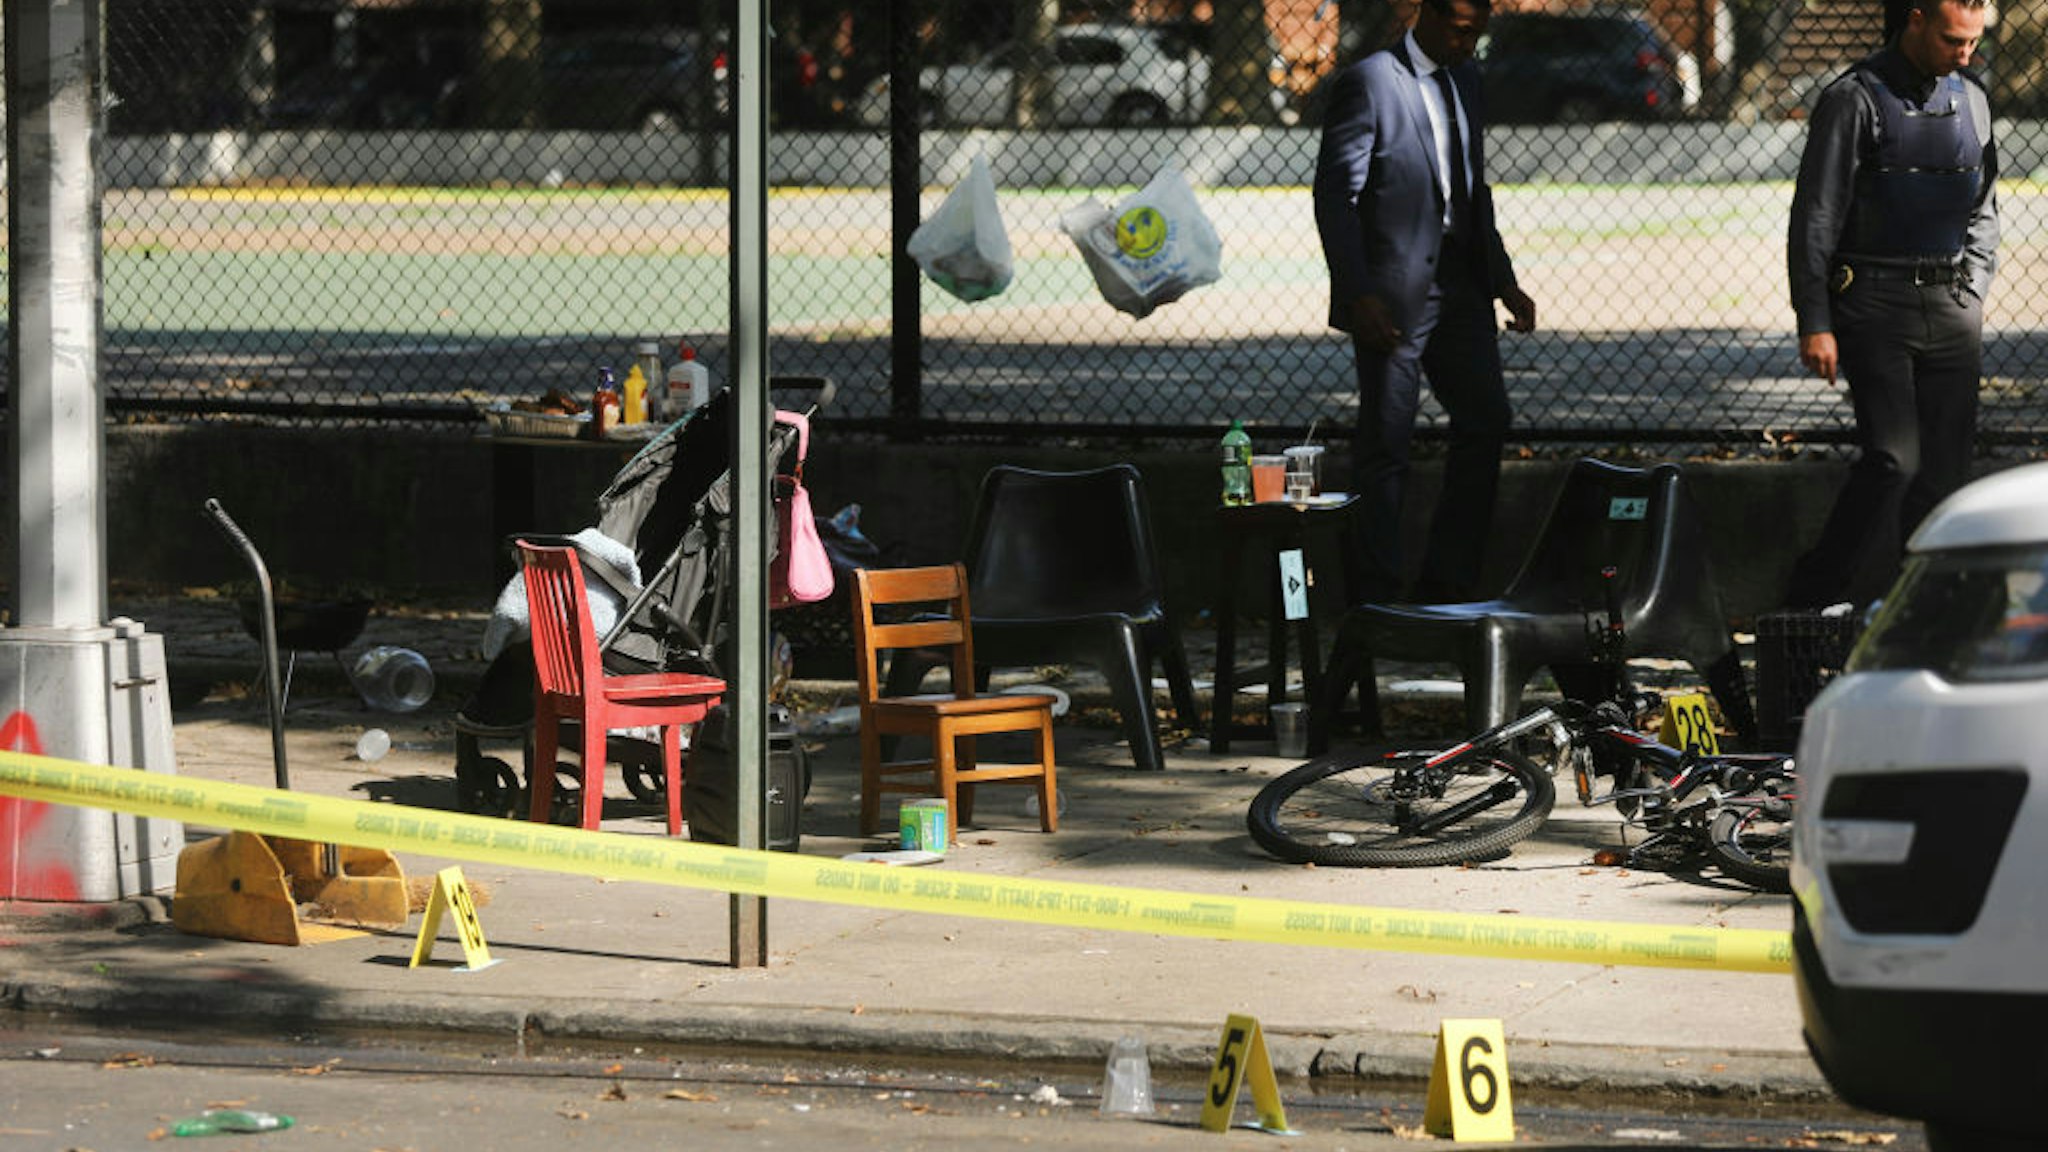 Police ballistic markers stand besides a child's chair and bicycle at a crime scene in Brooklyn where a one year old child was shot and killed on July 13, 2020 in New York City.